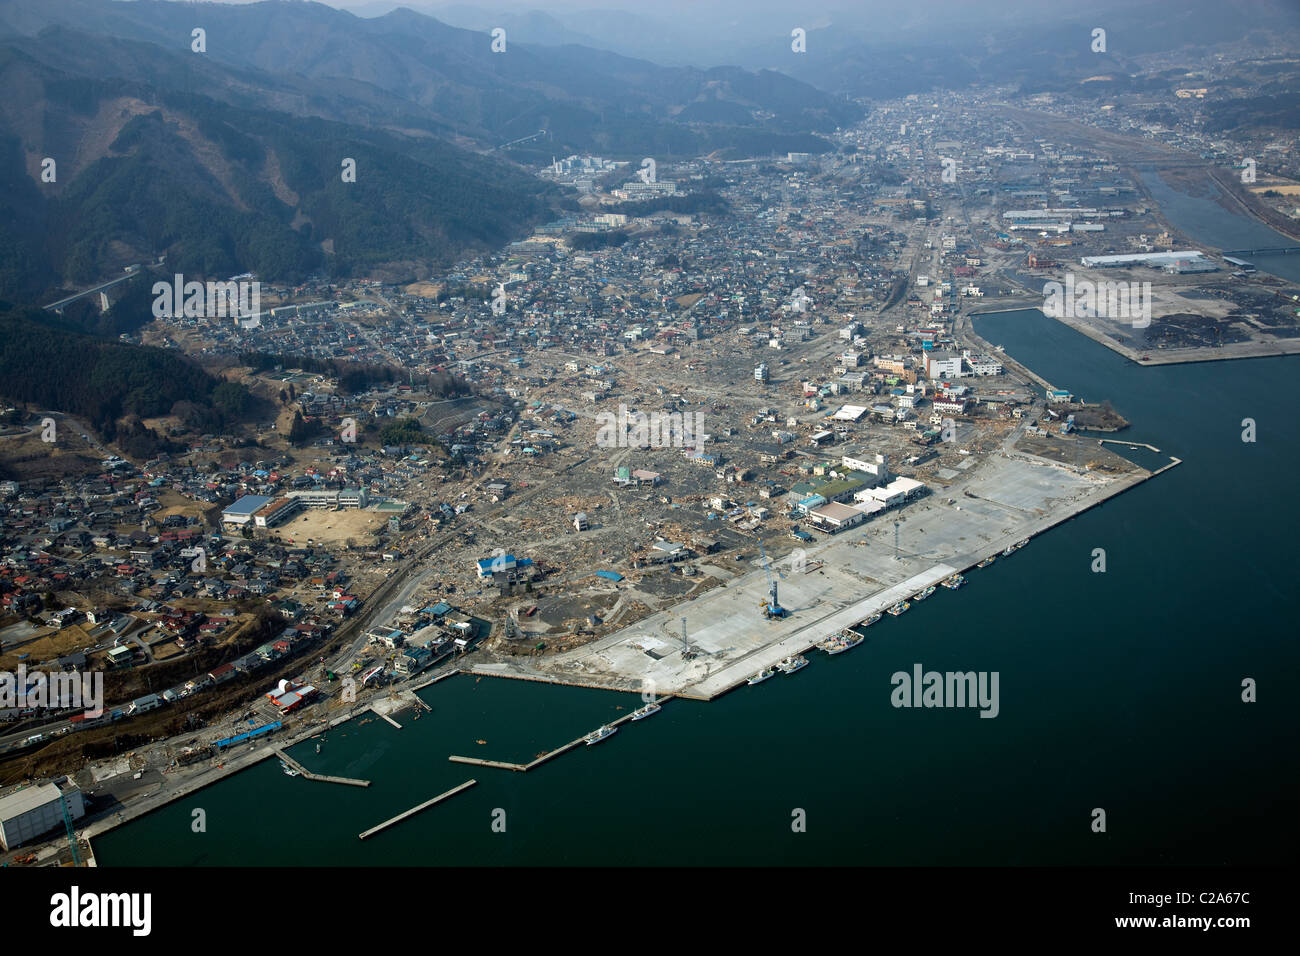 Aerial view of damage to Ofunato, Iwate Prefecture after a 9. 0 magnitude earthquake and subsequent tsunami devastated the area Stock Photo